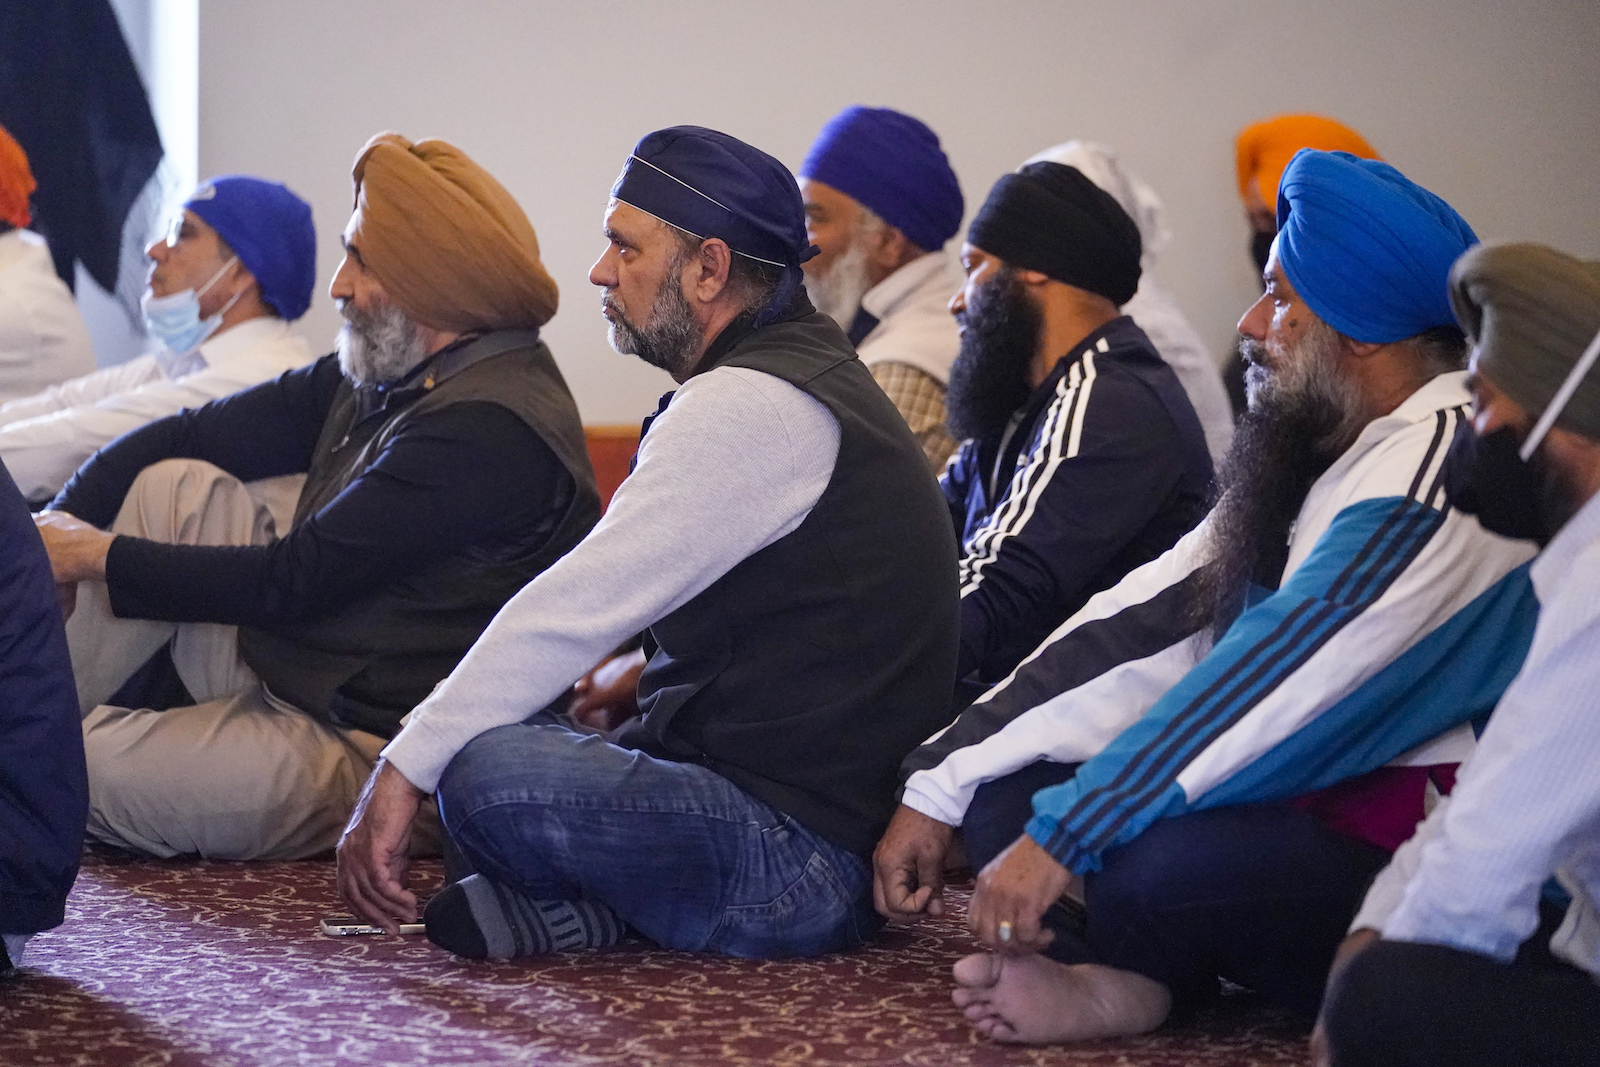 Members of the Sikh Coalition gather at the Sikh Satsang of Indianapolis in Indianapolis, Saturday, April 17, 2021 to formulate the groups response to the shooting at a FedEx facility in Indianapolis that claimed the lives of four members of the Sikh community. A gunman killed eight people and wounded several others before apparently taking his own life in a late-night attack at a FedEx facility near the Indianapolis airport, police said, in the latest in a spate of mass shootings in the United States after a relative lull during the pandemic. (AP Photo/Michael Conroy)